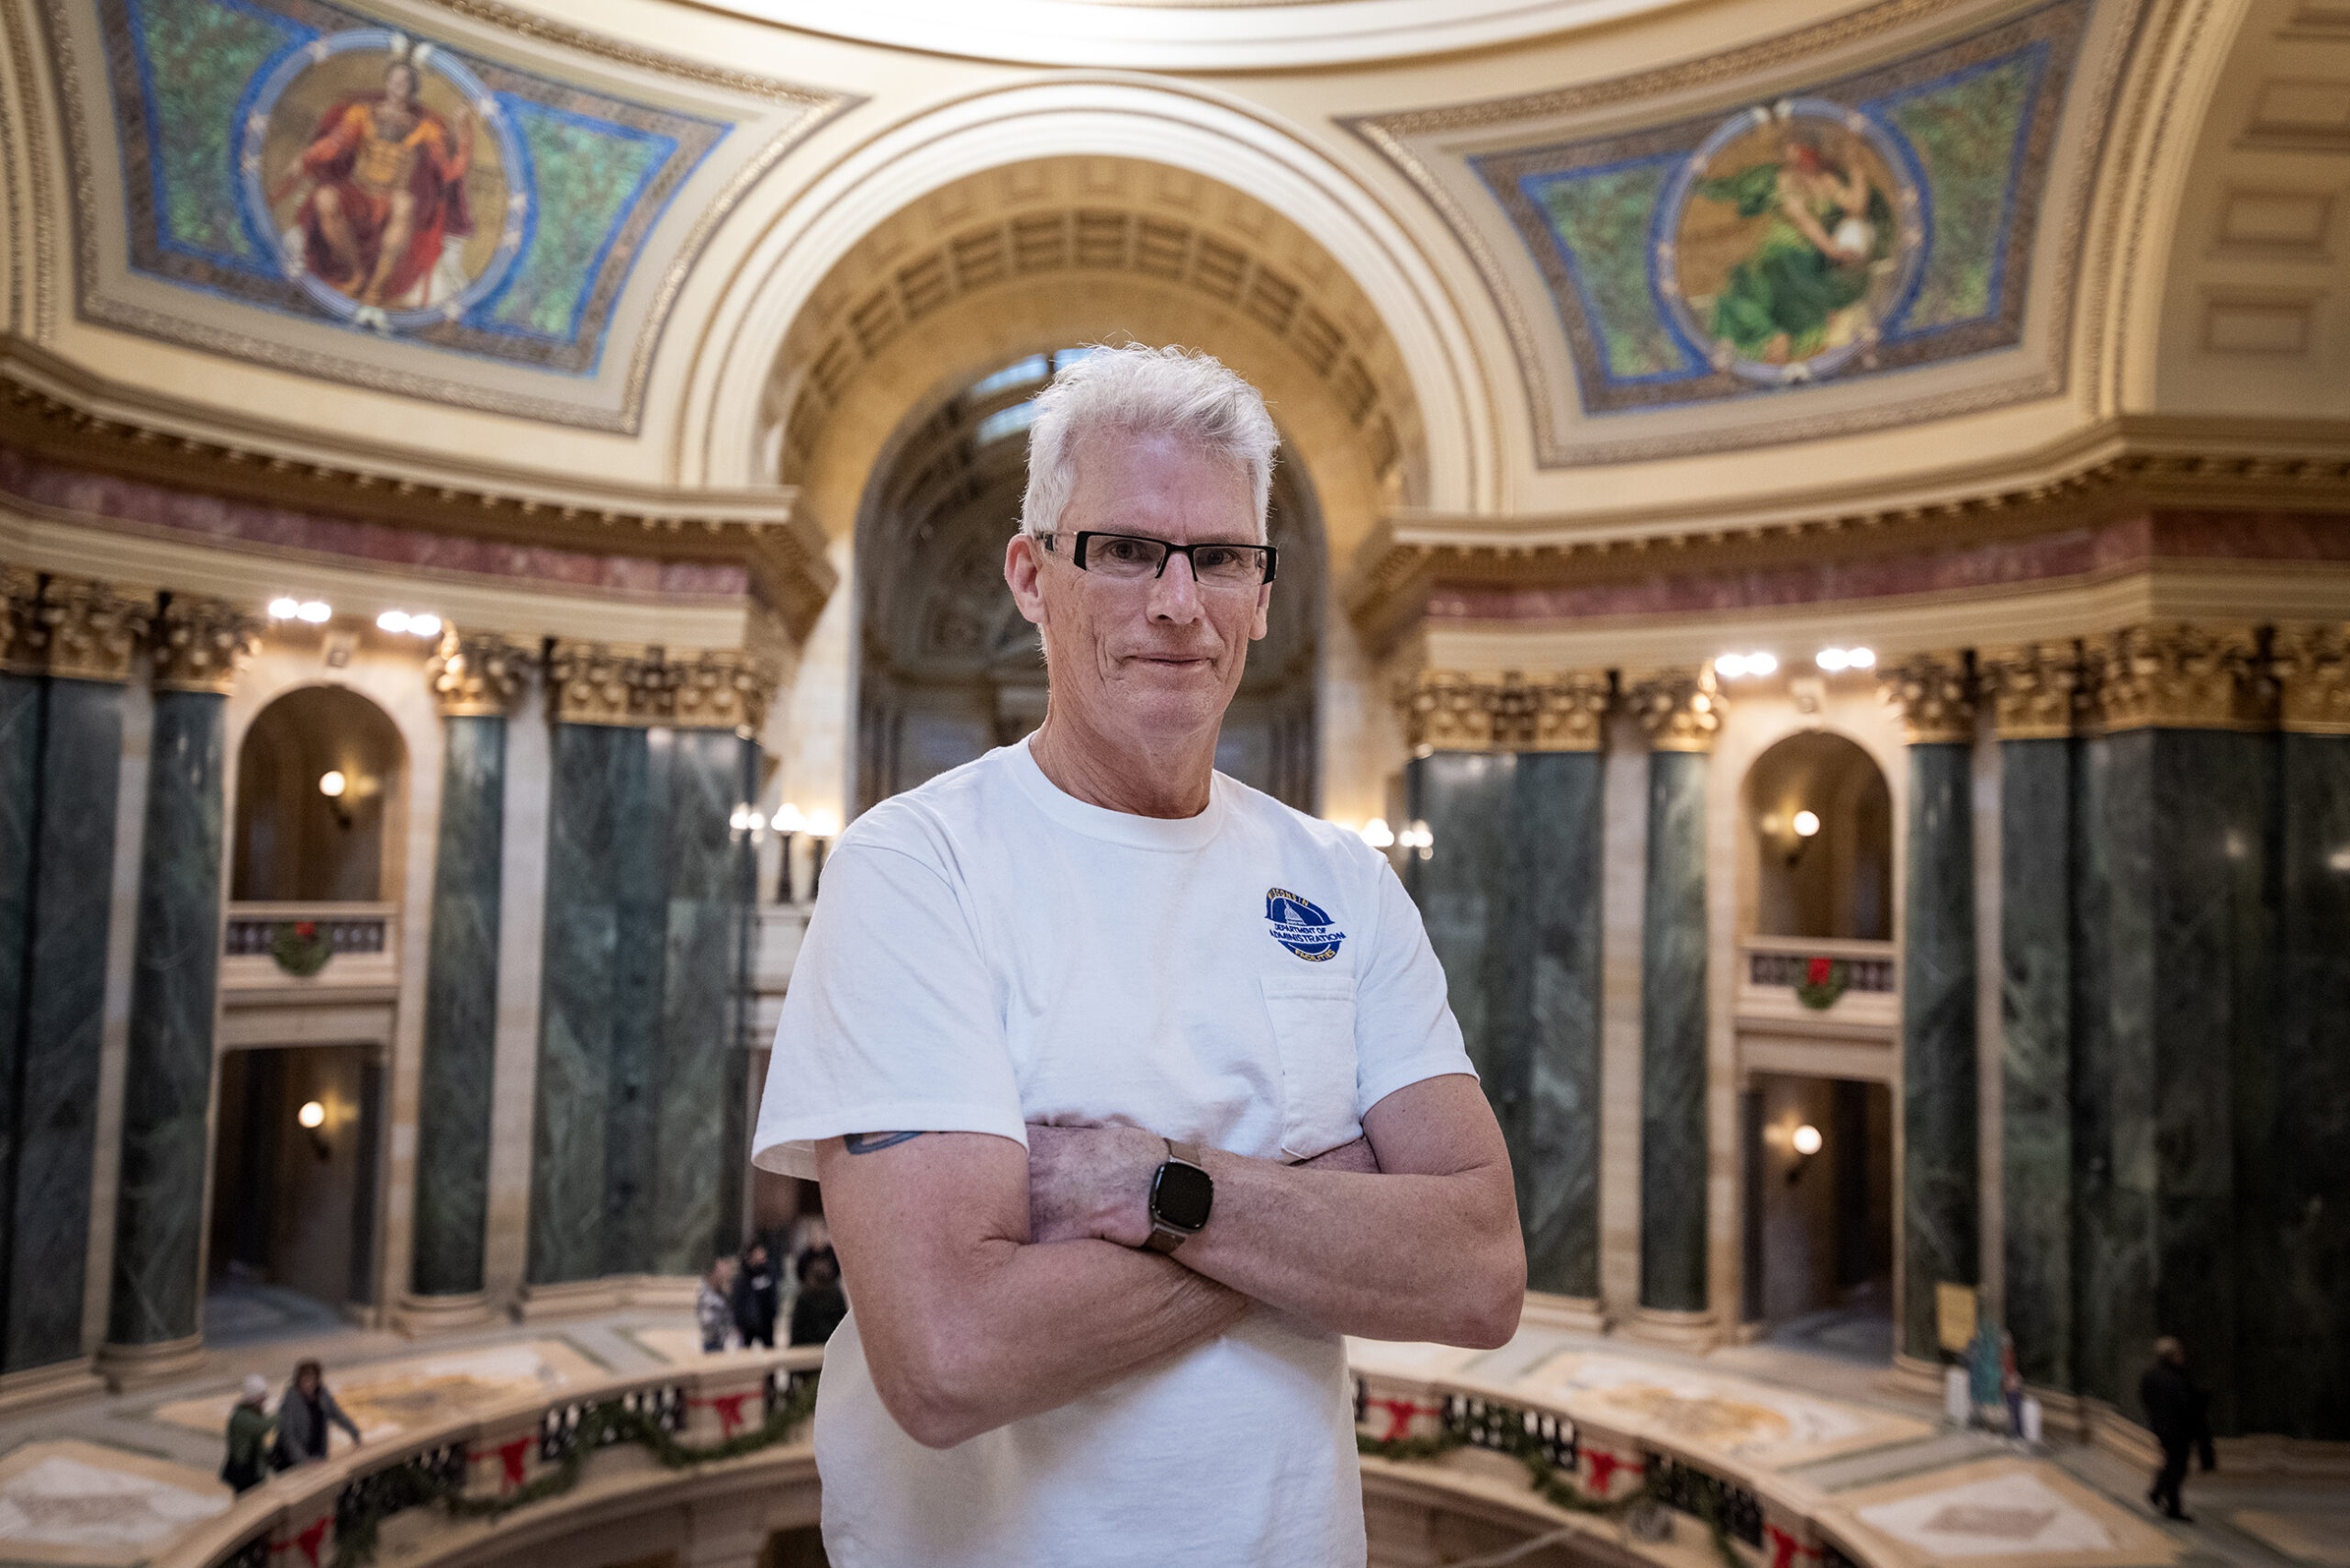 Jeff LaMay stands with his arms crossed. Decorative Capitol details can be seen behind him.